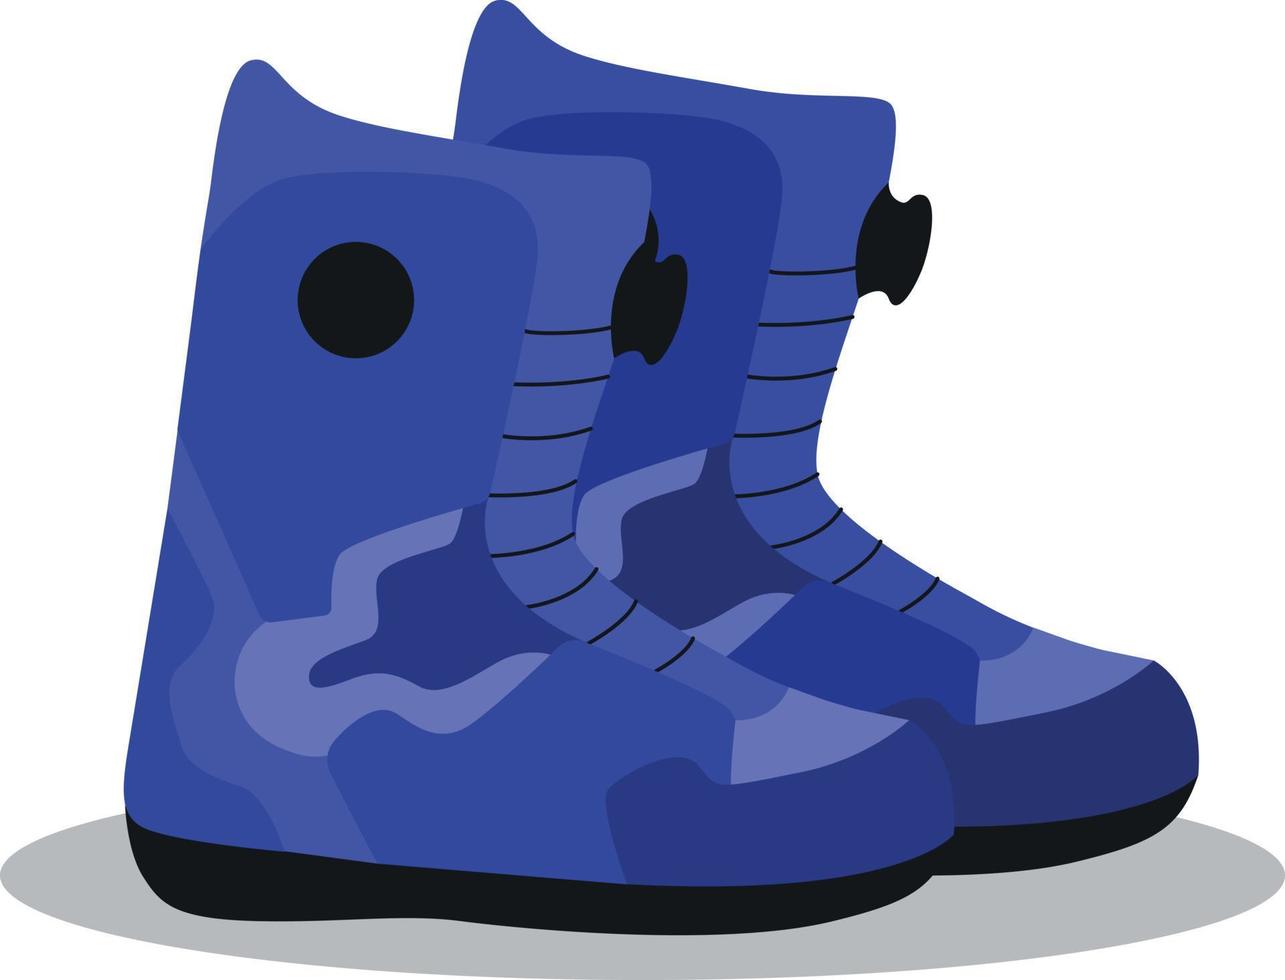 Snowboard Boots. Specialized shoes for snowboarders. Winter sport. Winter activity. vector